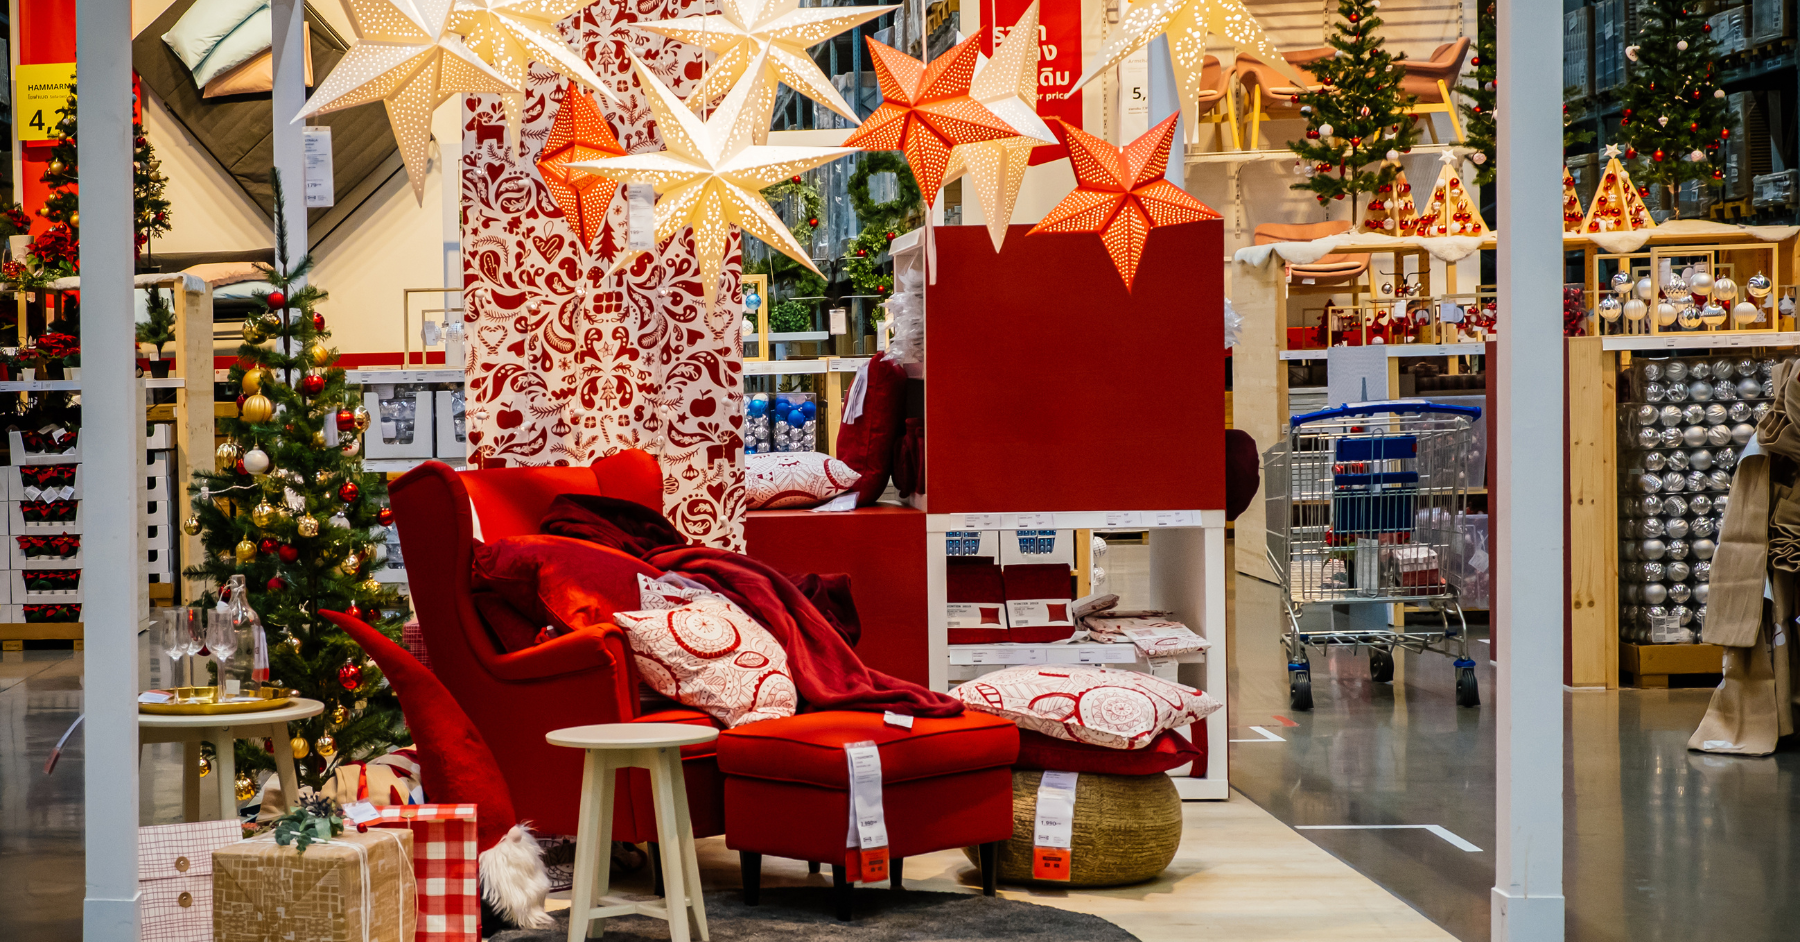 How To Make Gift Shopping In Your Store More Enticing